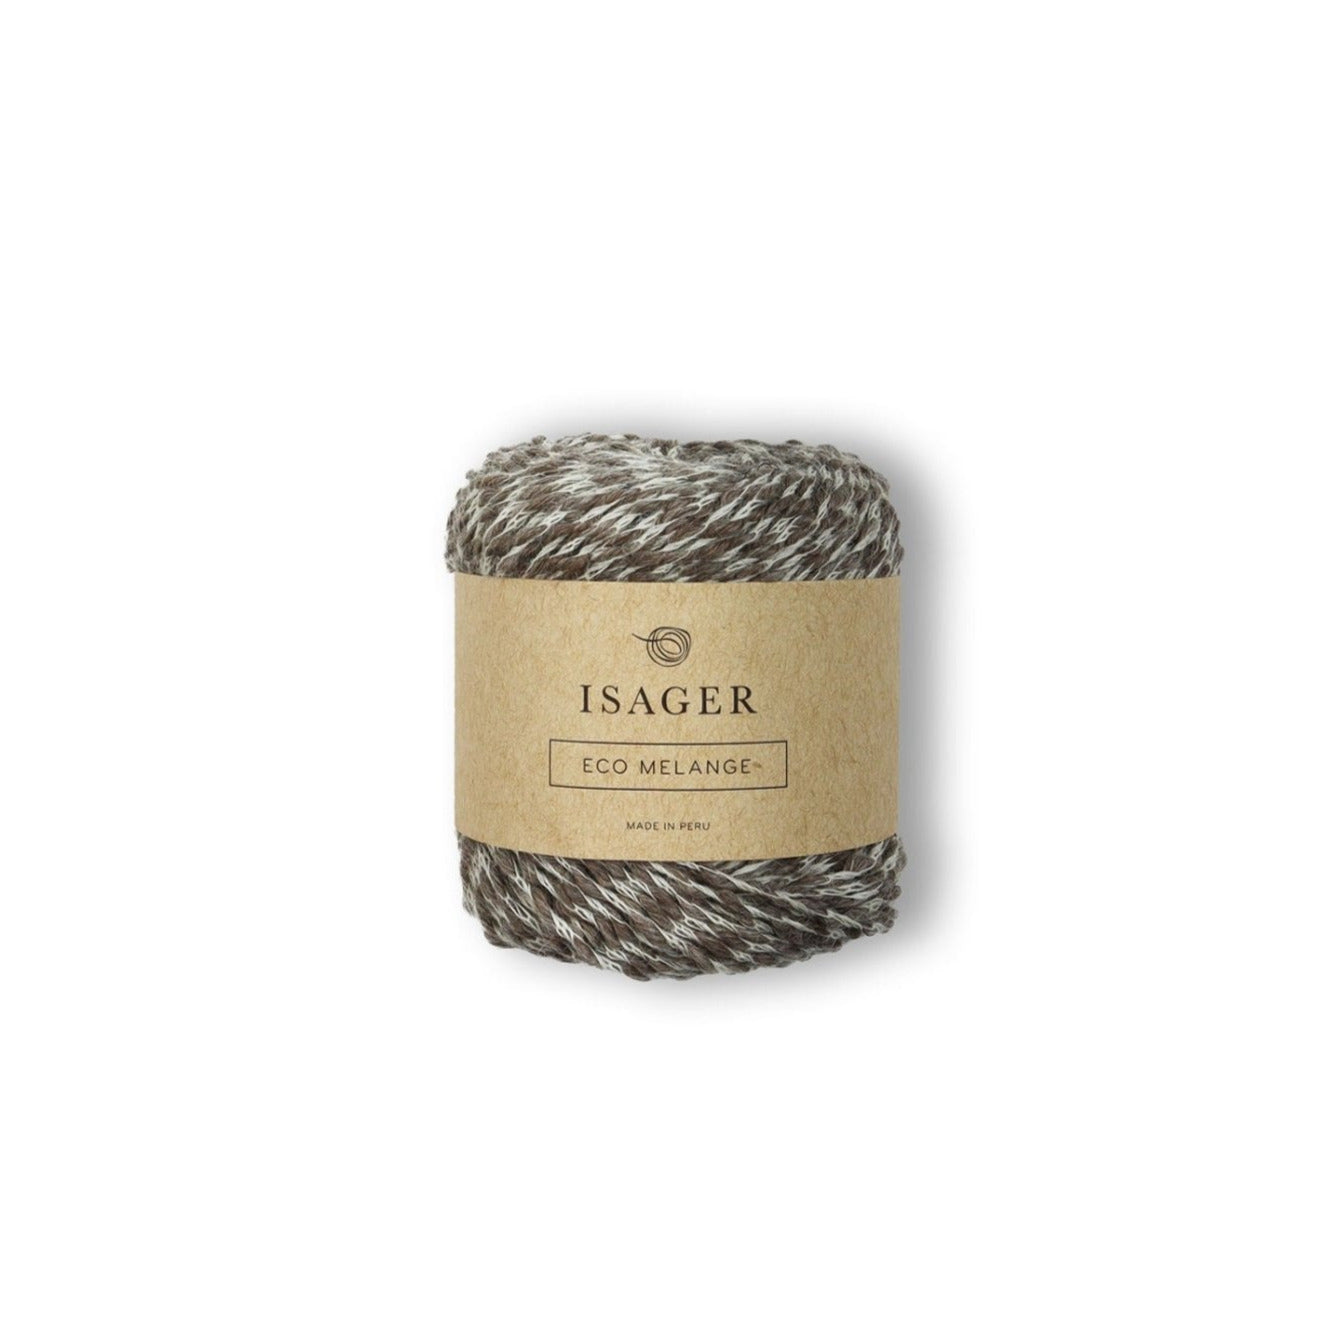 Isager Eco Melange - 6M - 5 Ply - Alpaca - The Little Yarn Store